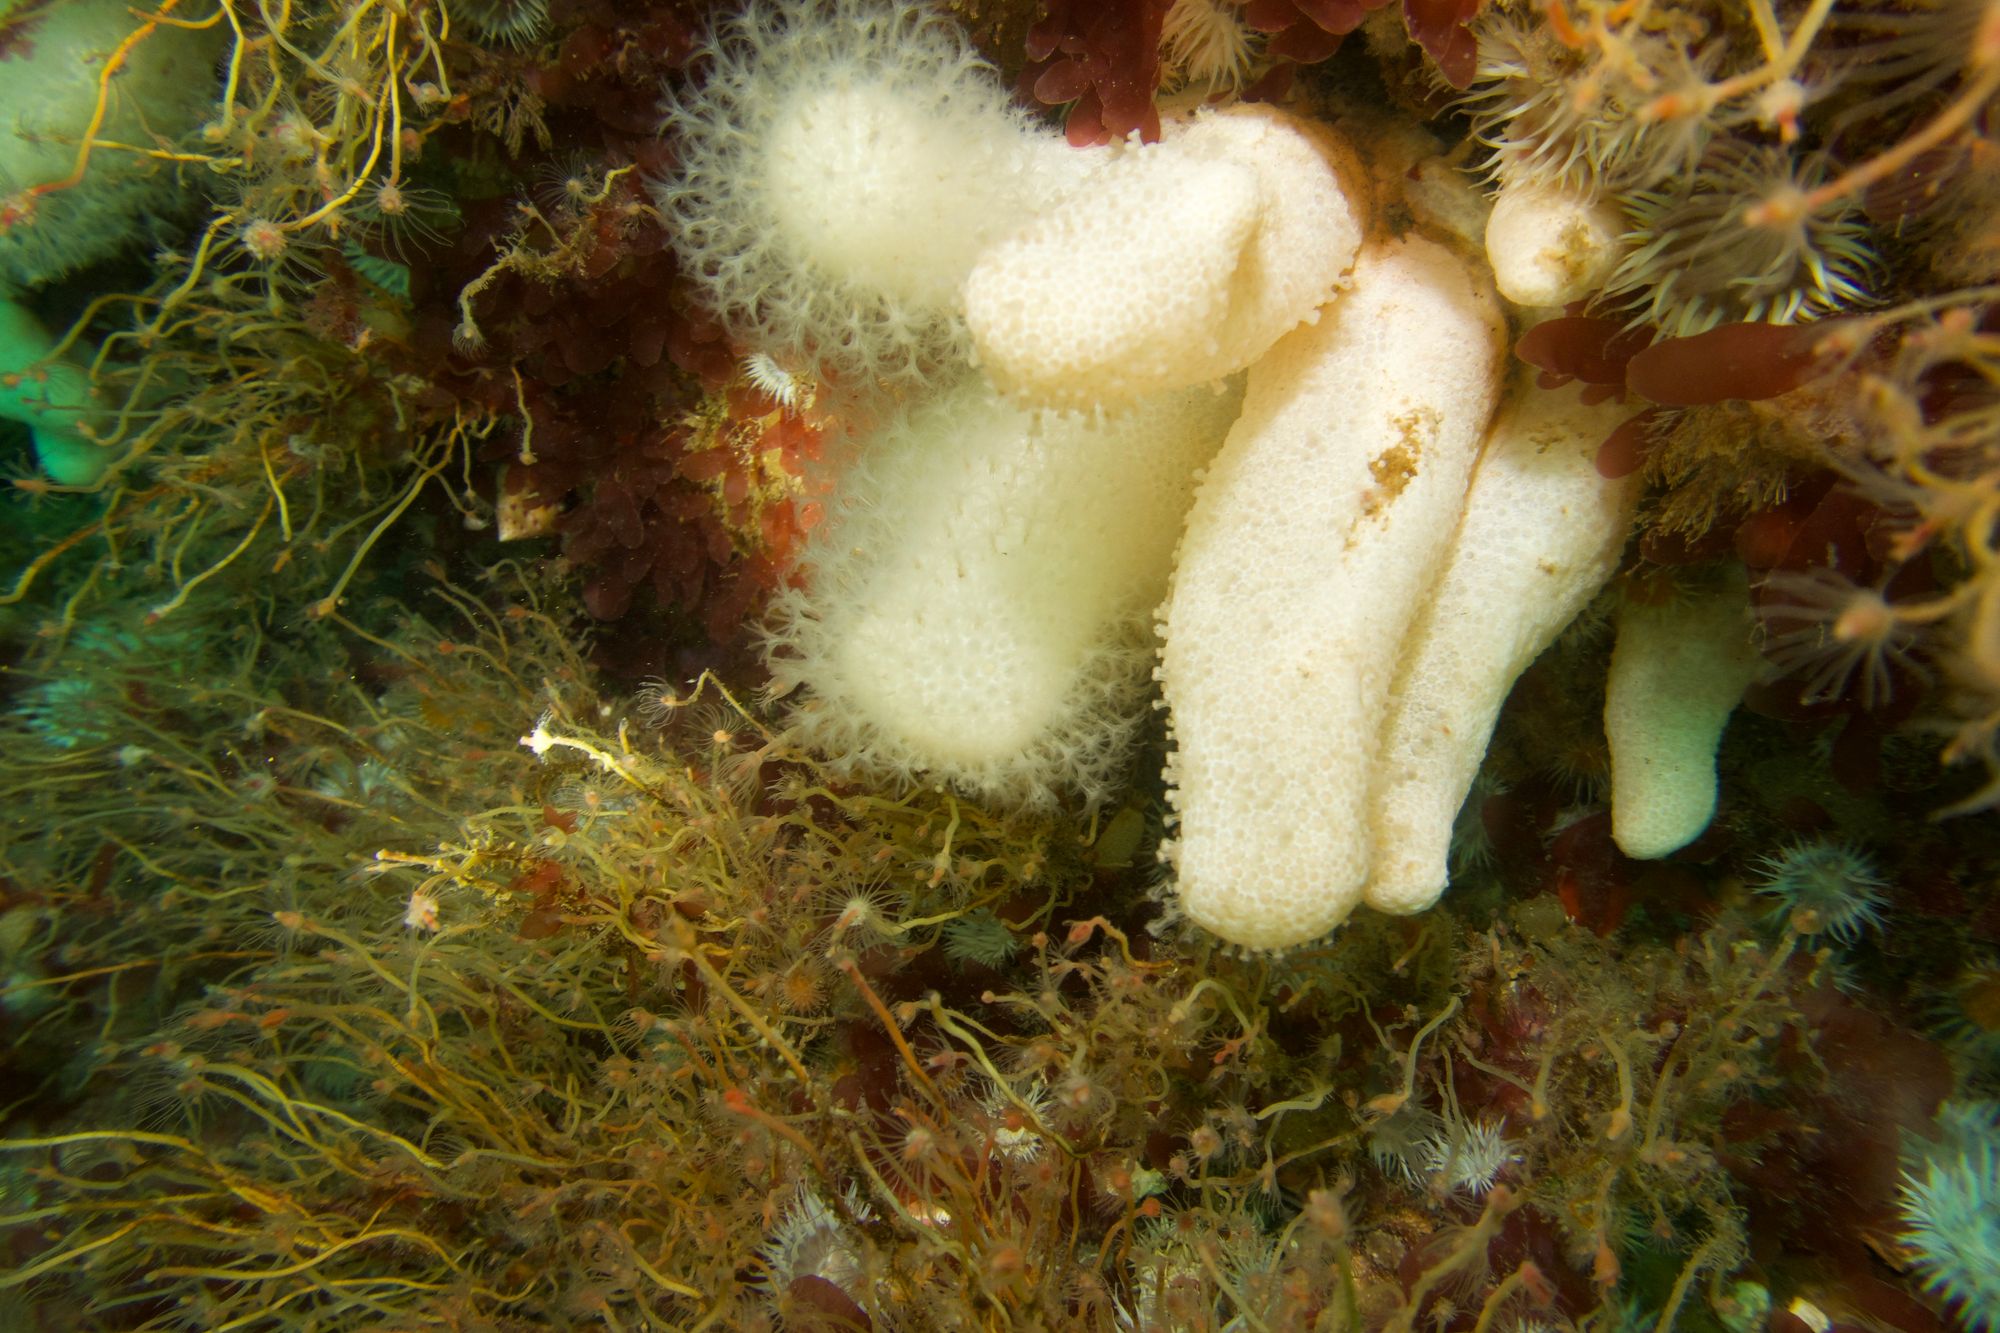 Capturing The Burroo's Beauty: Scuba Diving & Photography under the Isle of Man"